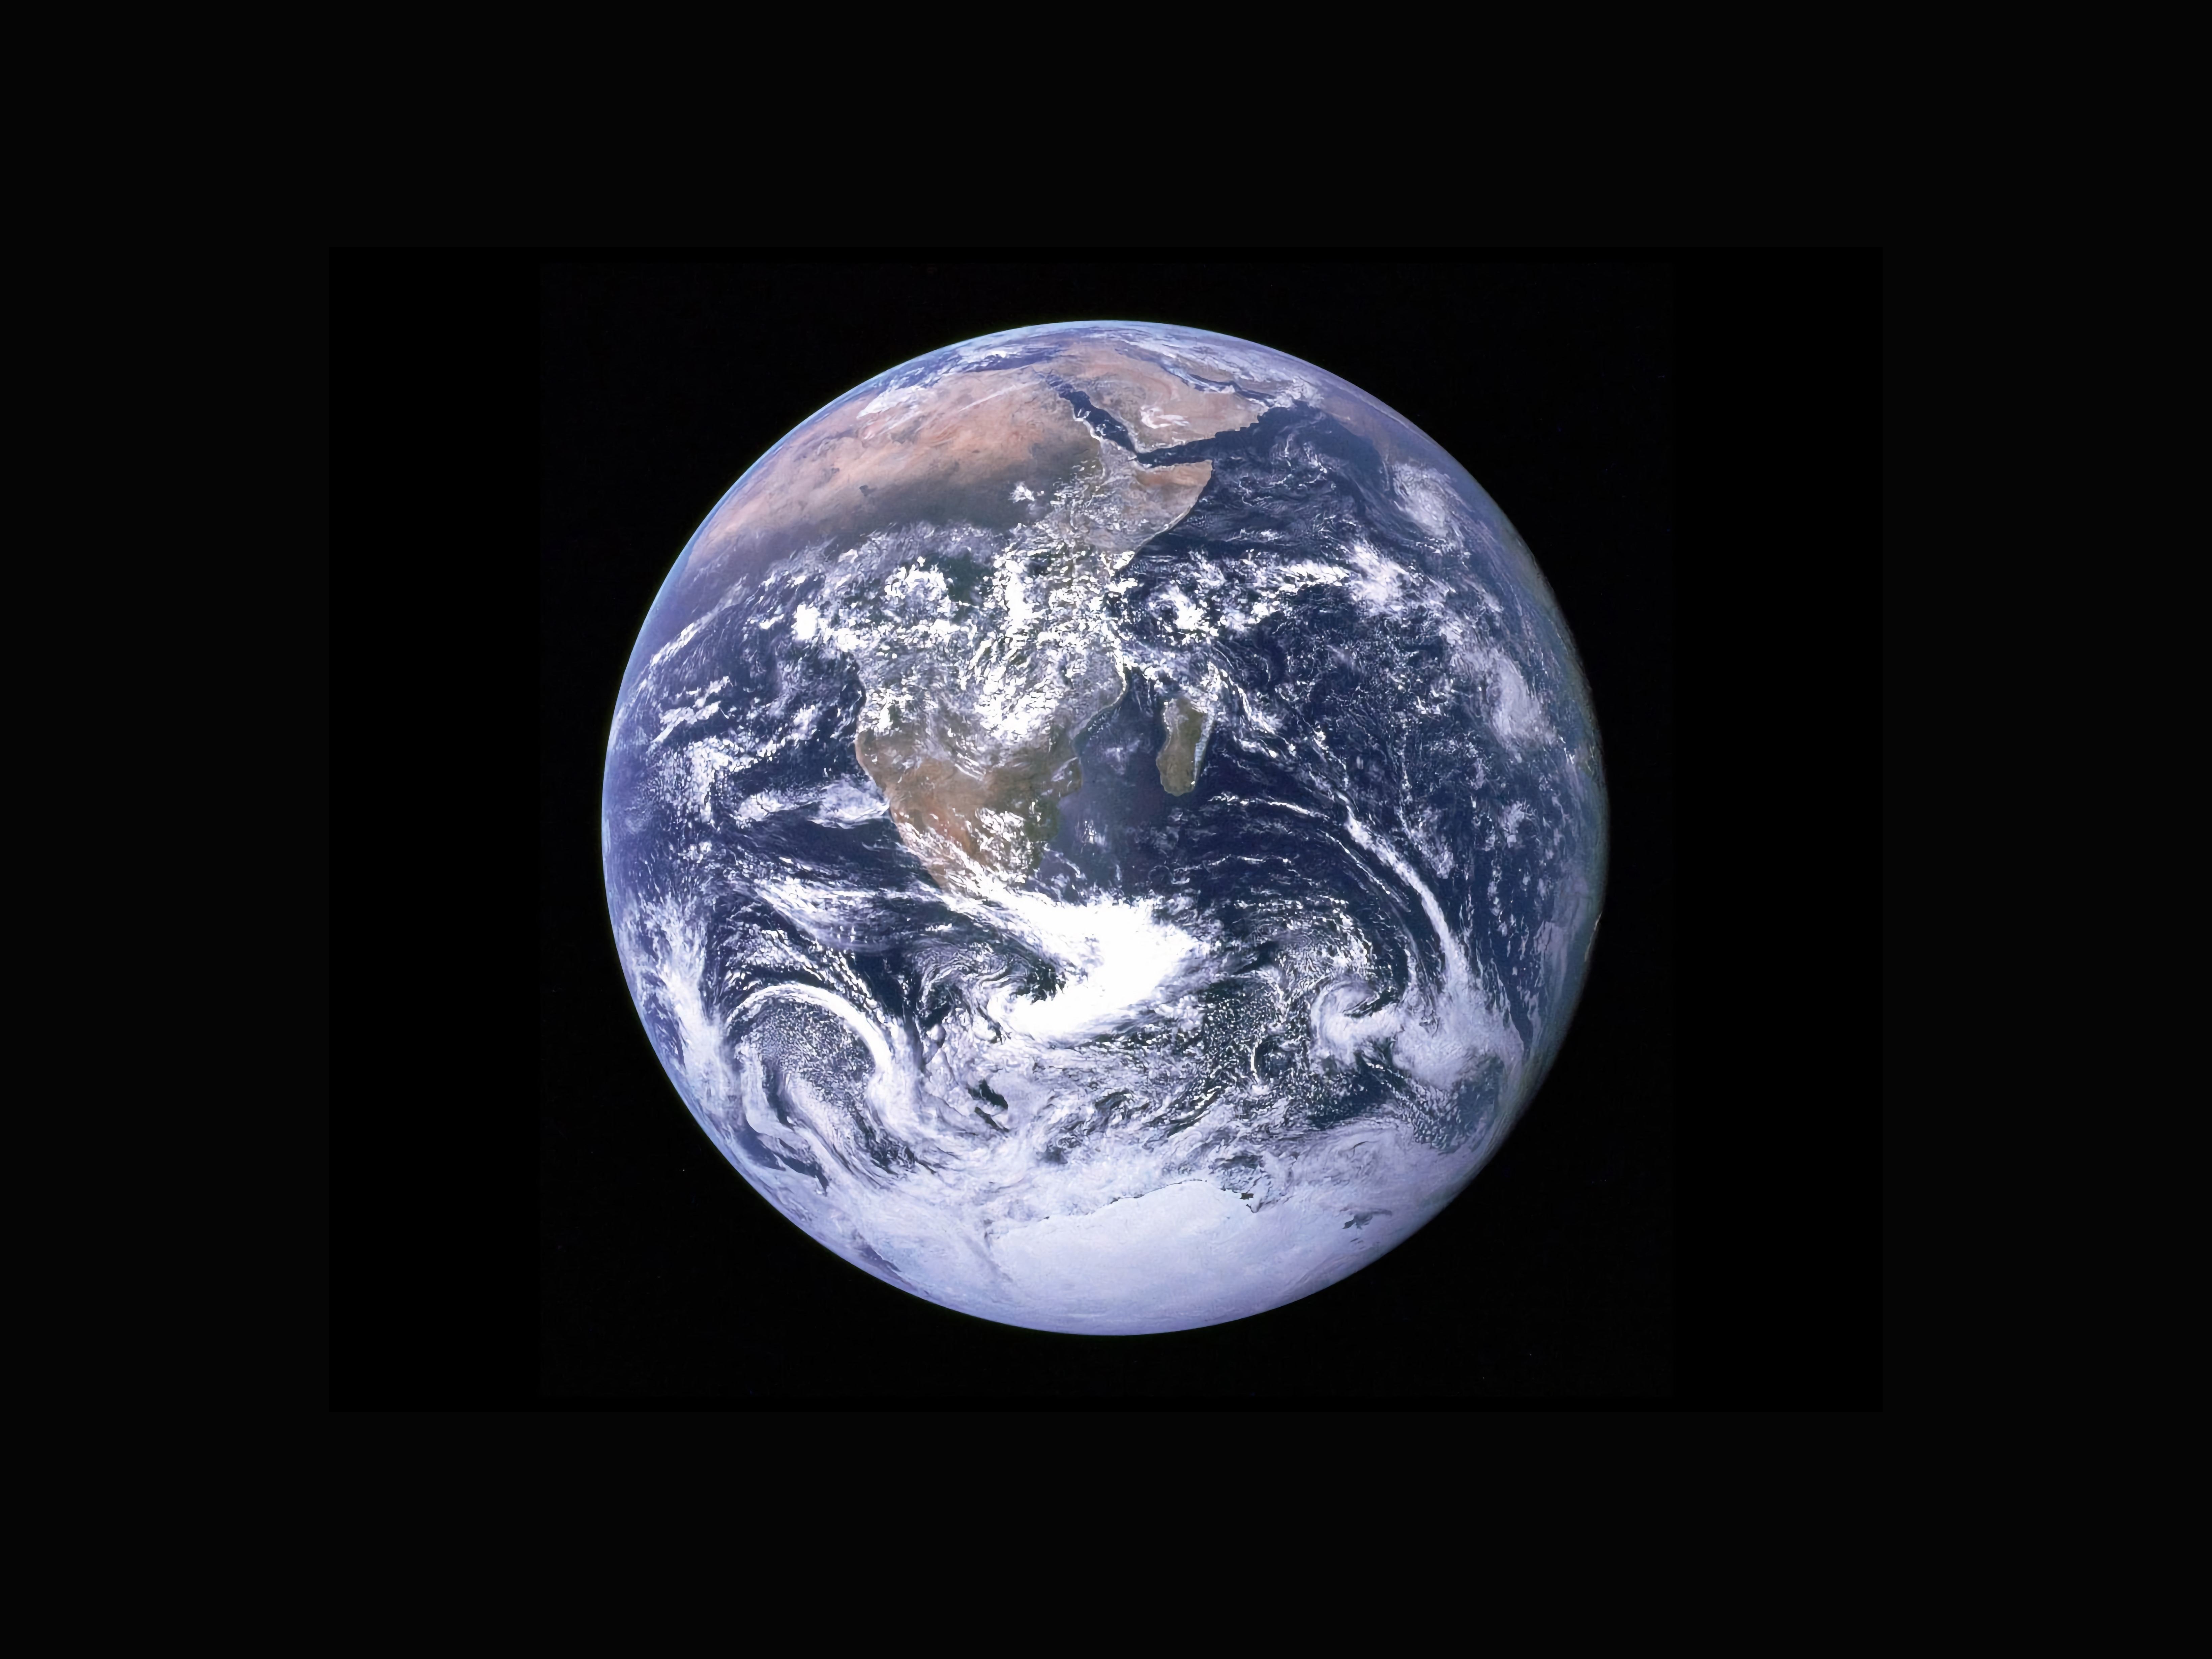 View of the Earth as seen from space.